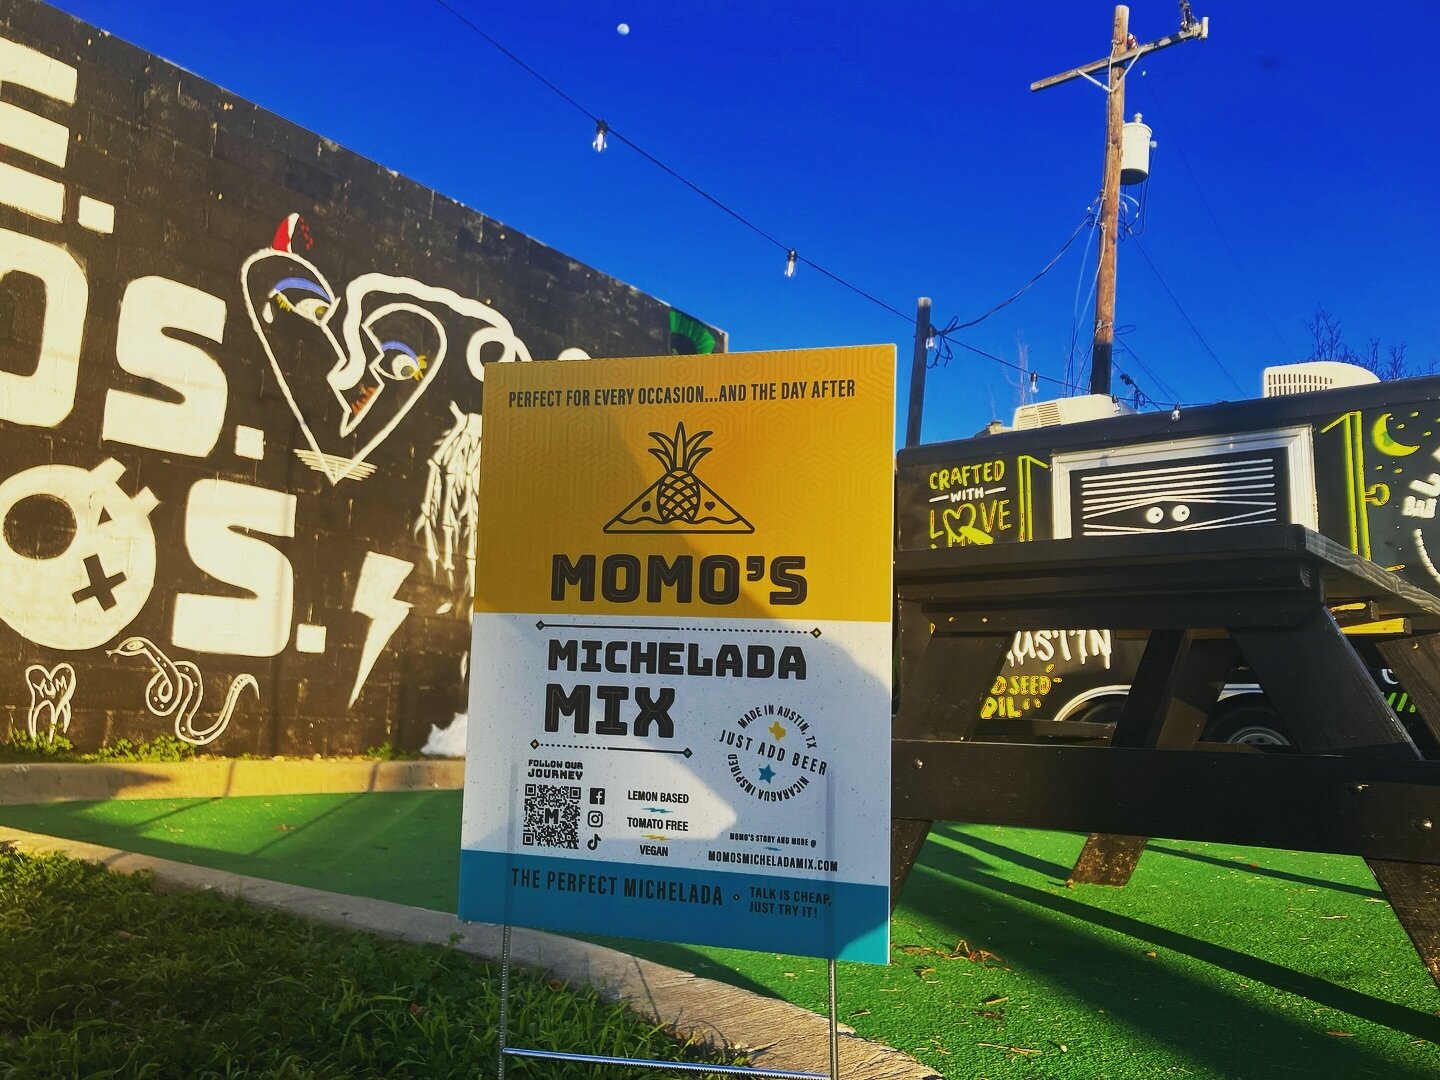 Enjoyed the free Micheladas that were given out at our grand opening? @momosmichelada is available all over Austin! Make sure to give em a follow! 

Oh and and don&rsquo;t forget we sell Momo&rsquo;s minis here and on DoorDash! They make the free bee